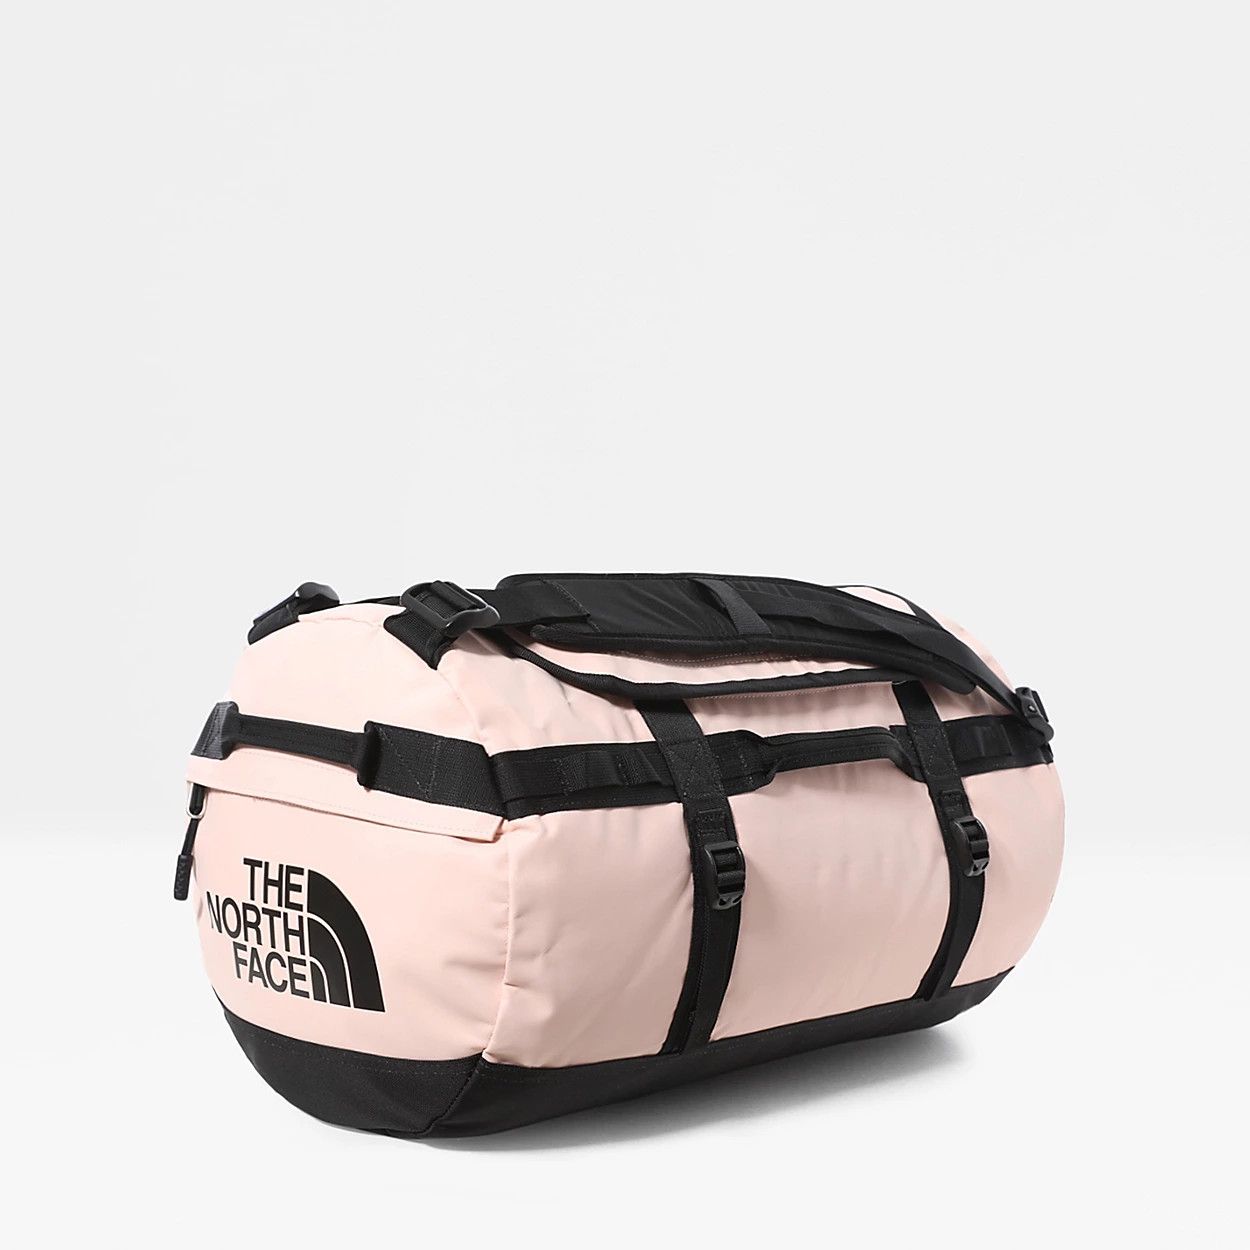 Sac de voyage Base Camp Duffel - S - Evening Sand Pink TNF Black THE NORTH  FACE - Sports Aventure